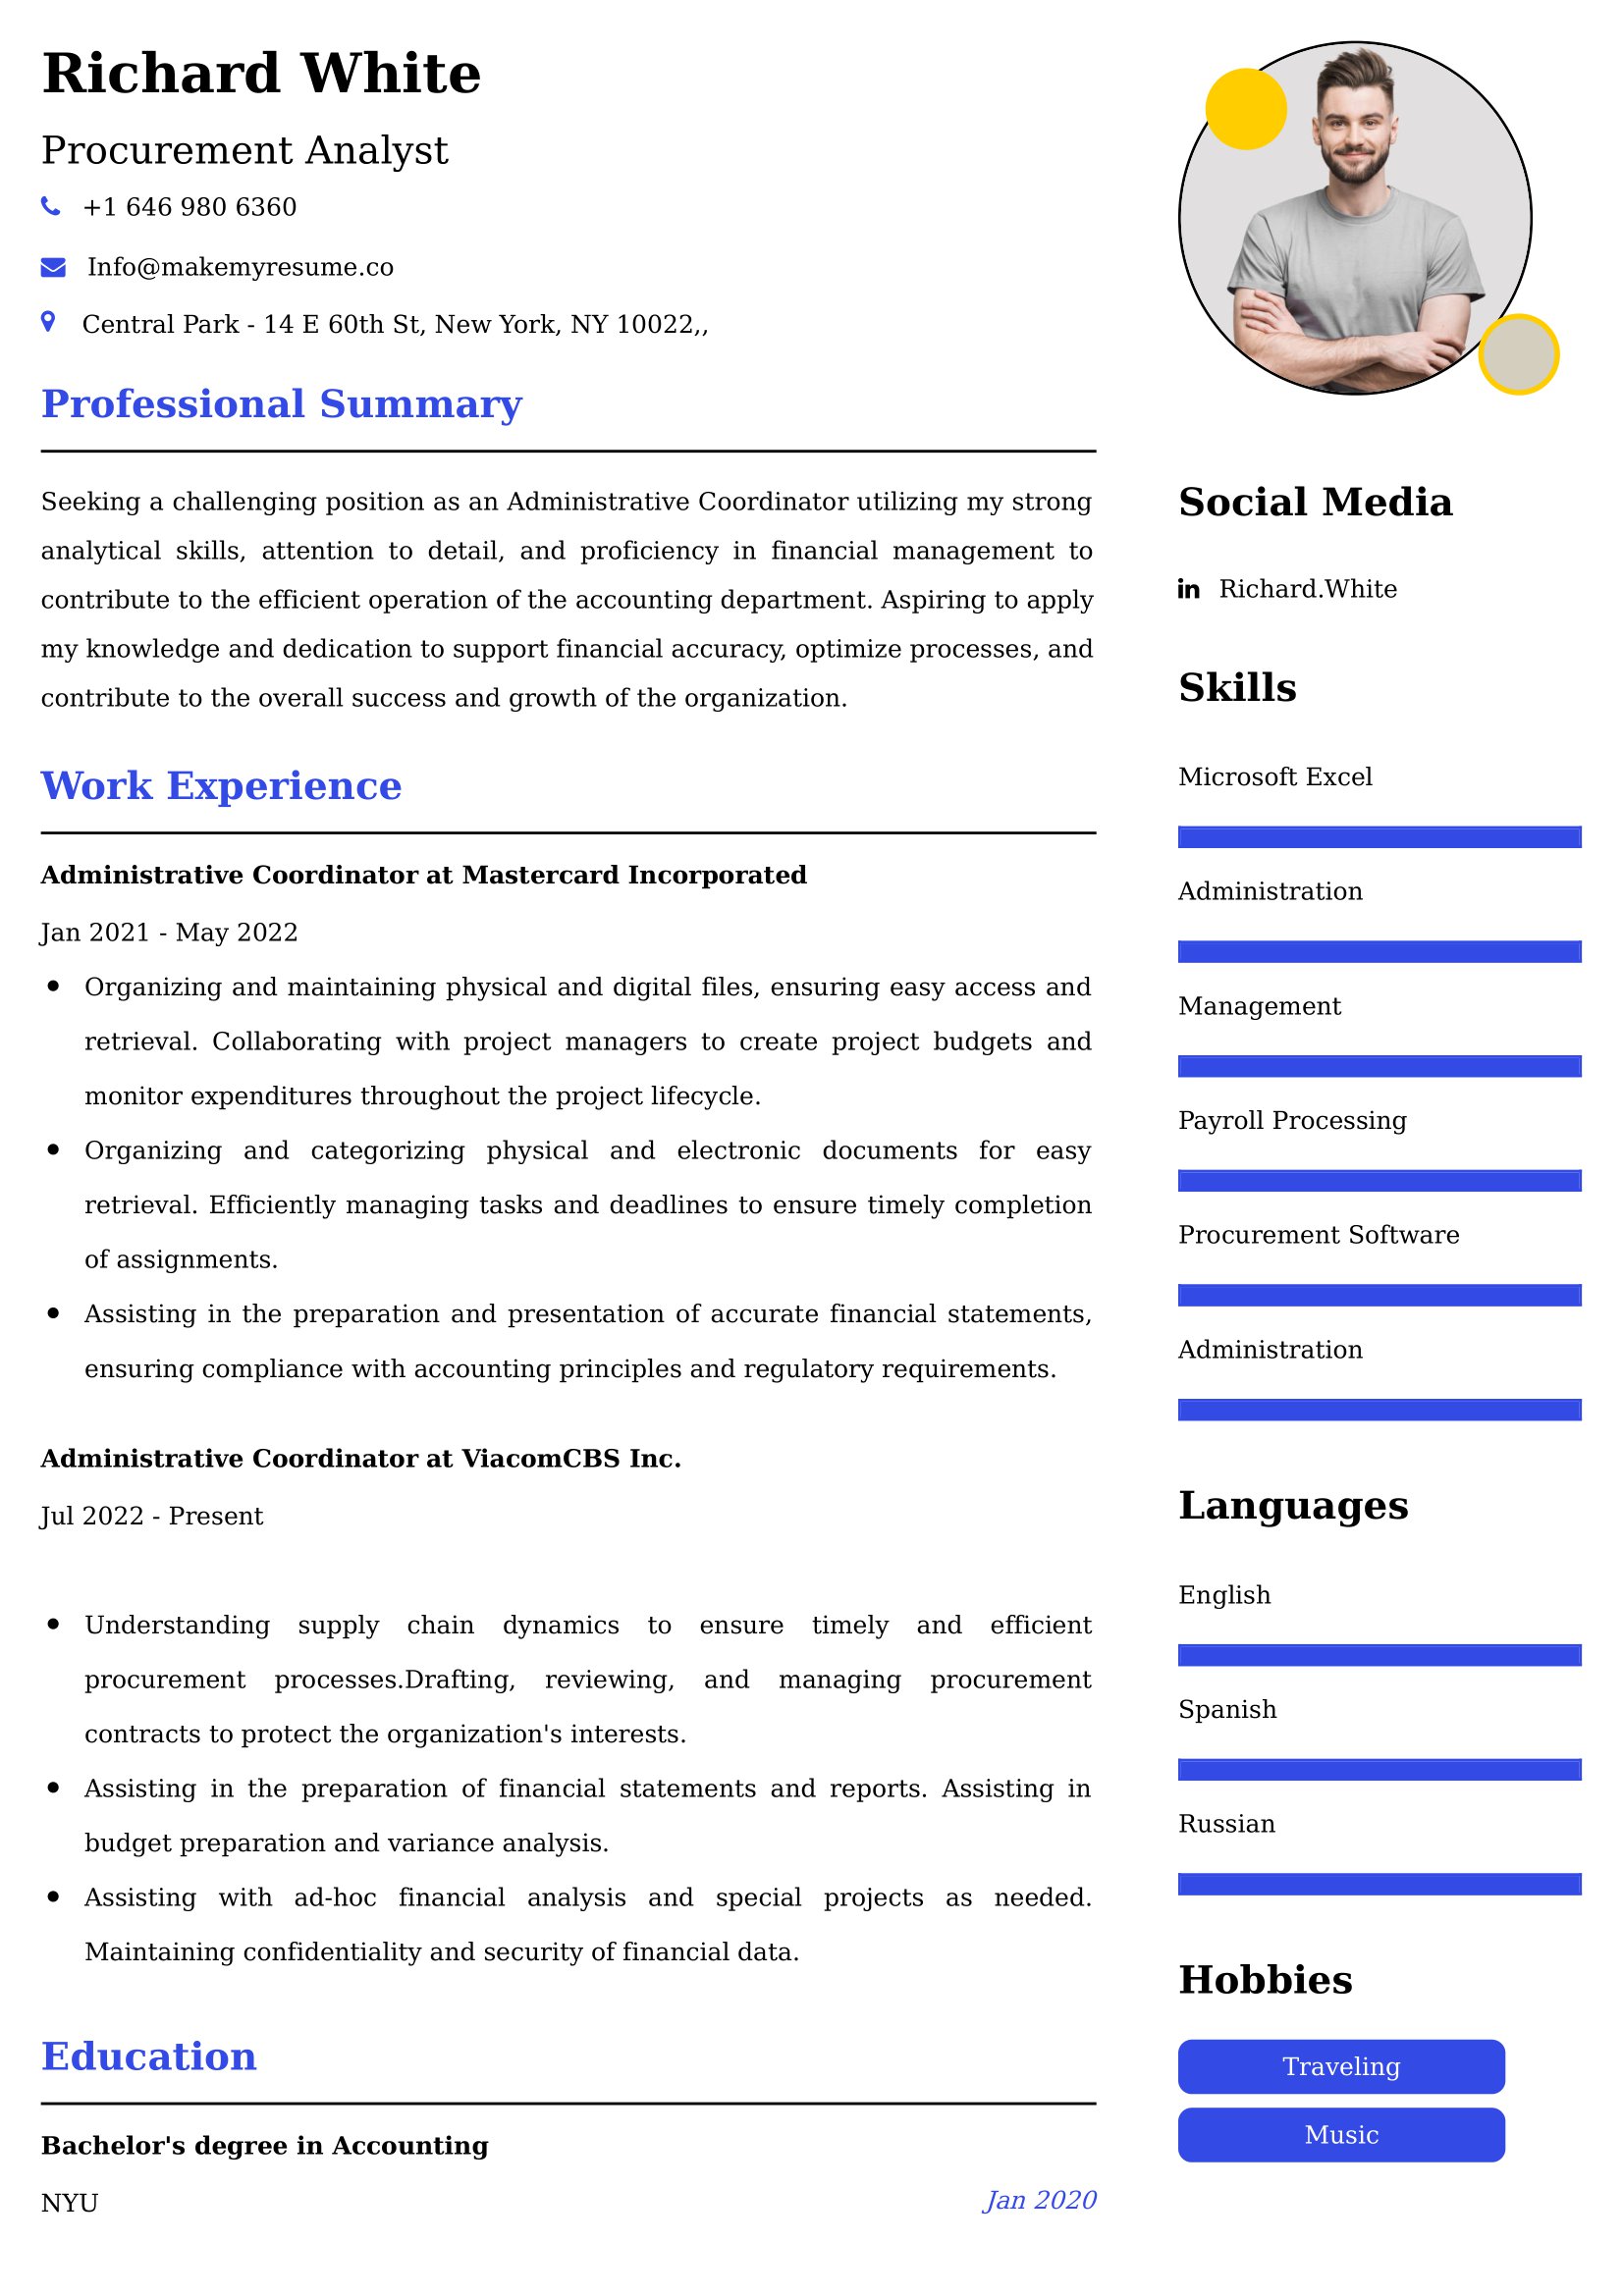 Procurement Analyst Resume Examples - UK Format, Latest Template.